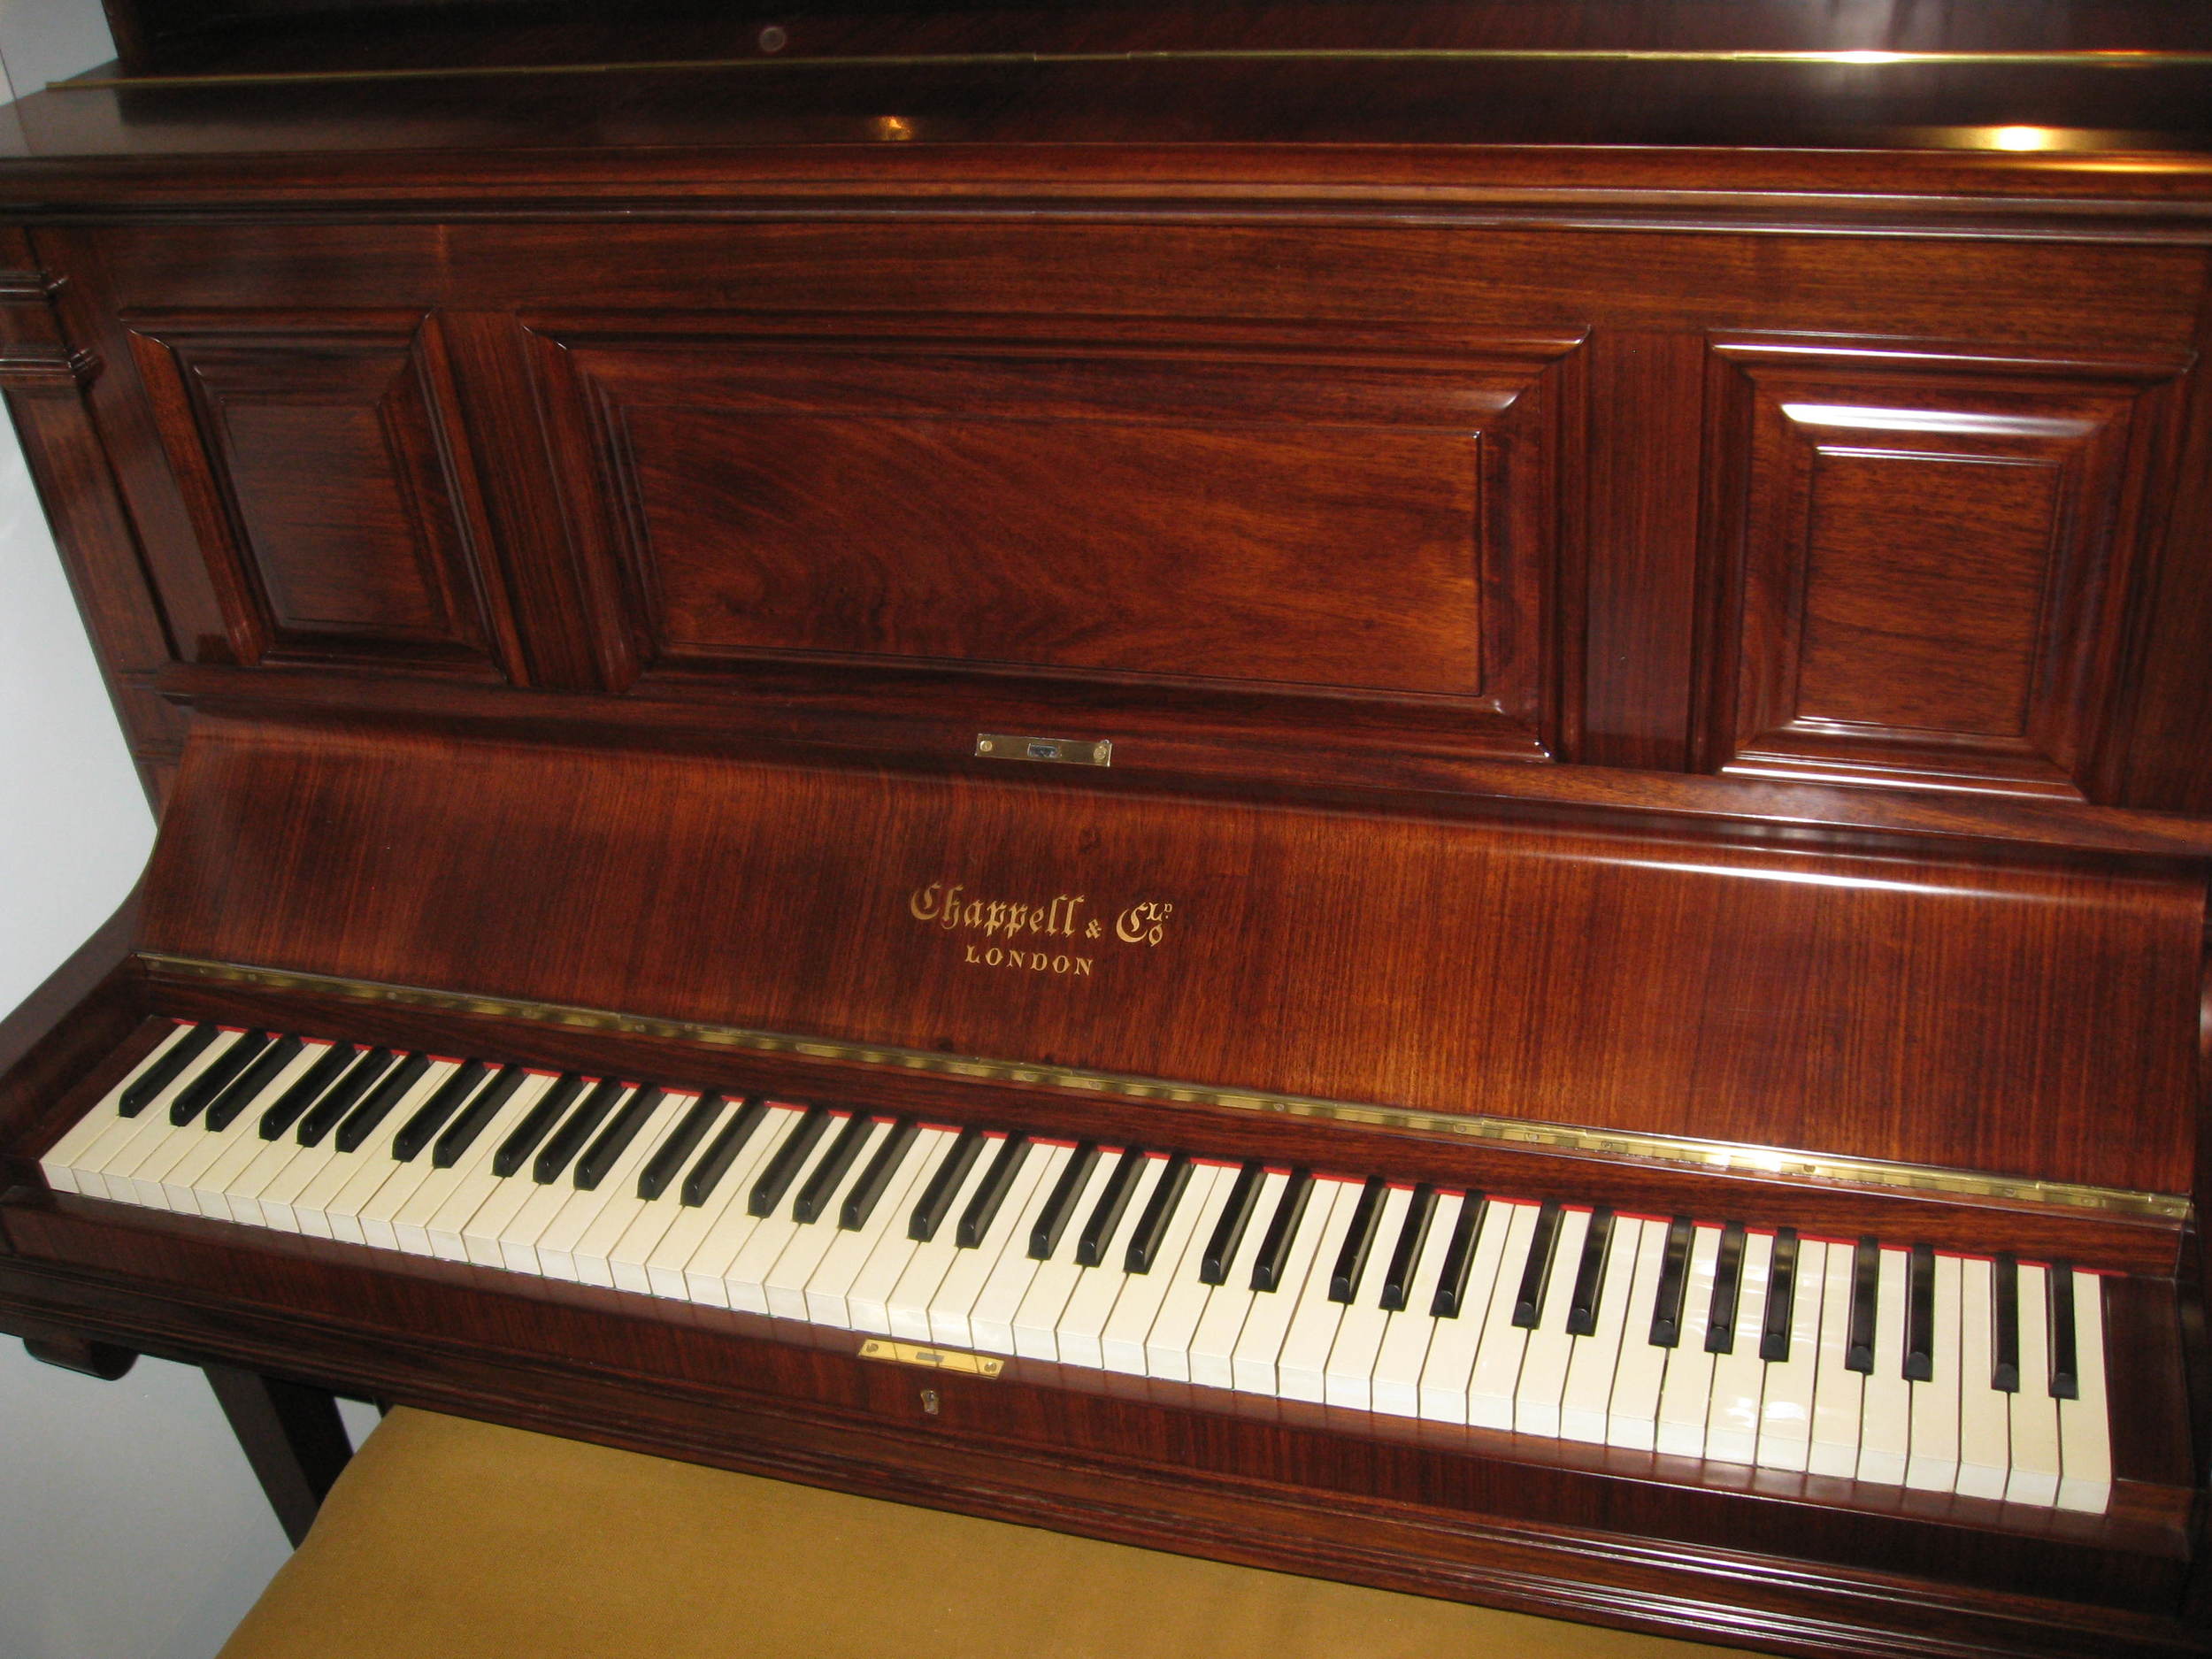 Chappell & Co Rosewood Upright